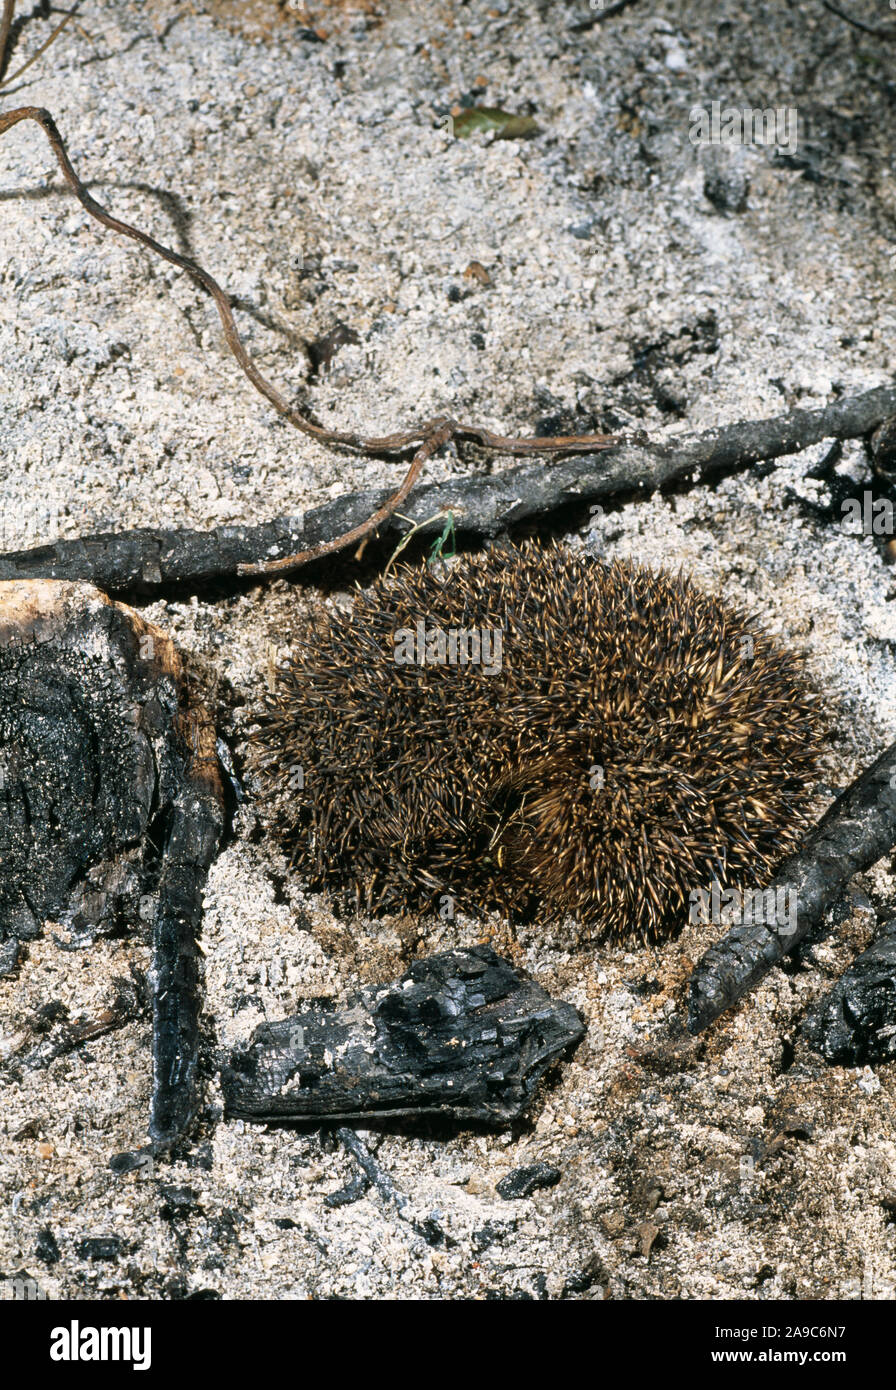 HEDGEHOG (Erinaceus europaeus).  Curled up amongst the ashes of a garden bonfire. Composition of some unlight bofires may be attractive as cover or ev Stock Photo